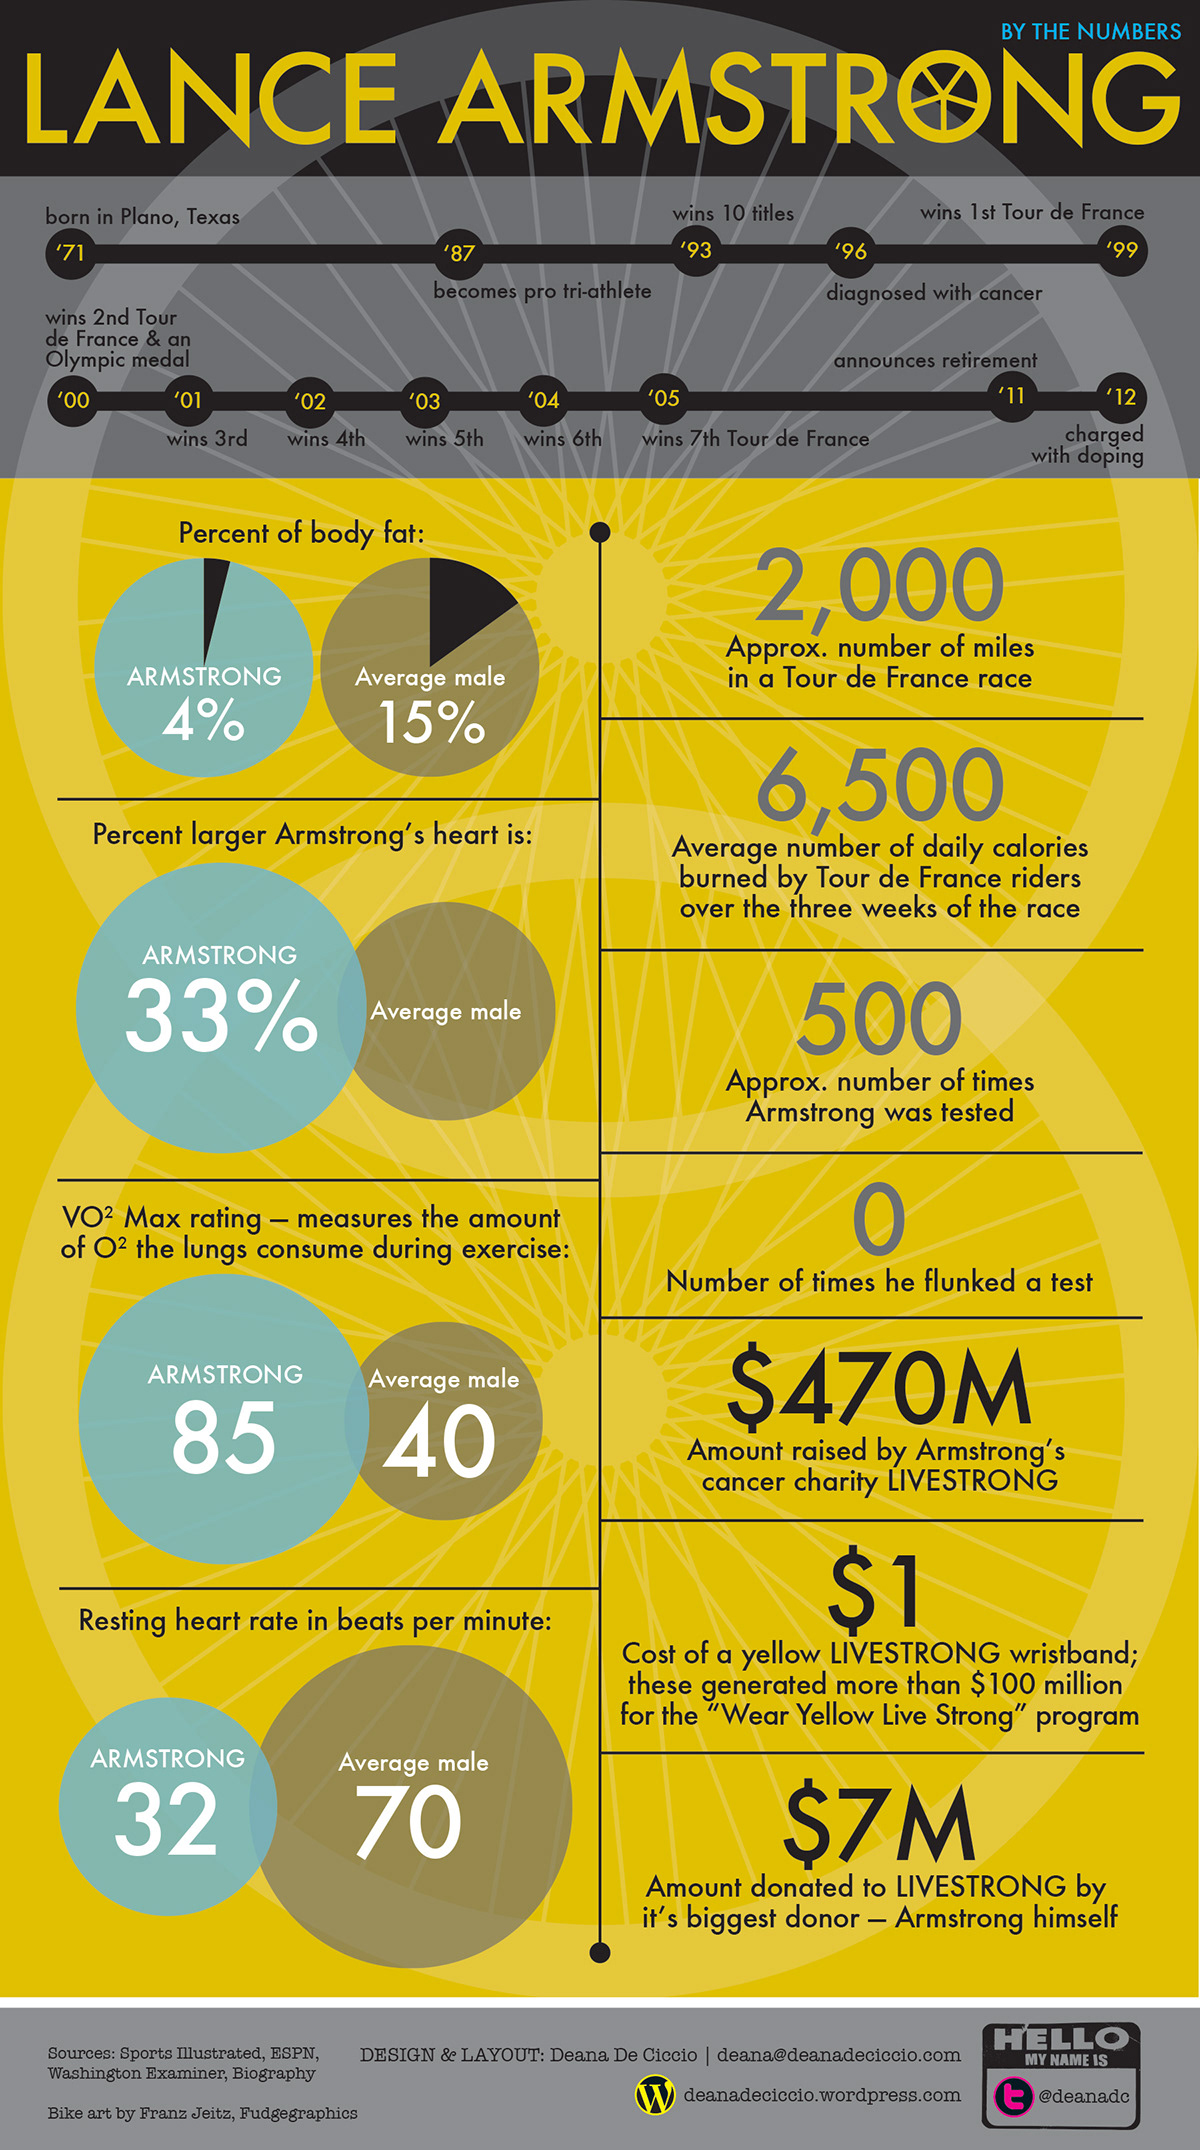 infographic Lance Armstrong by the numbers